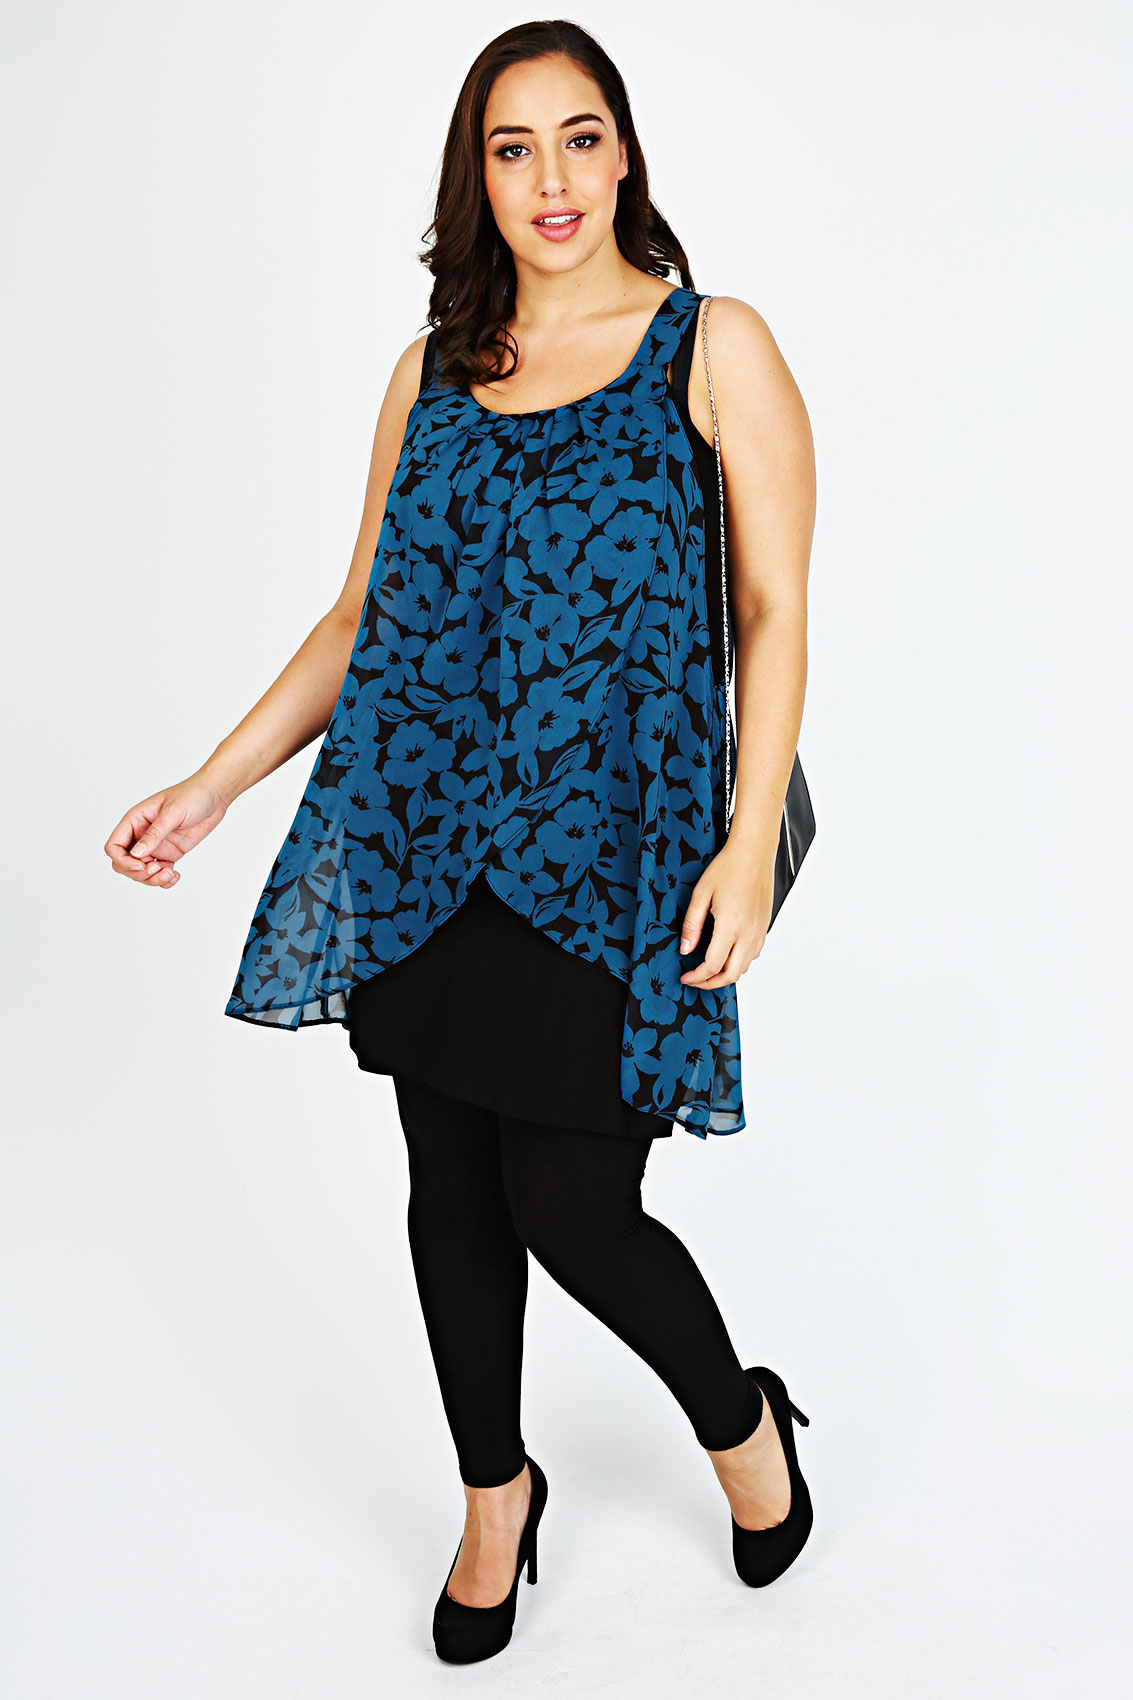 Black And Teal Floral Print Chiffon Overlay Tunic Dress Plus Size 14,16 ...